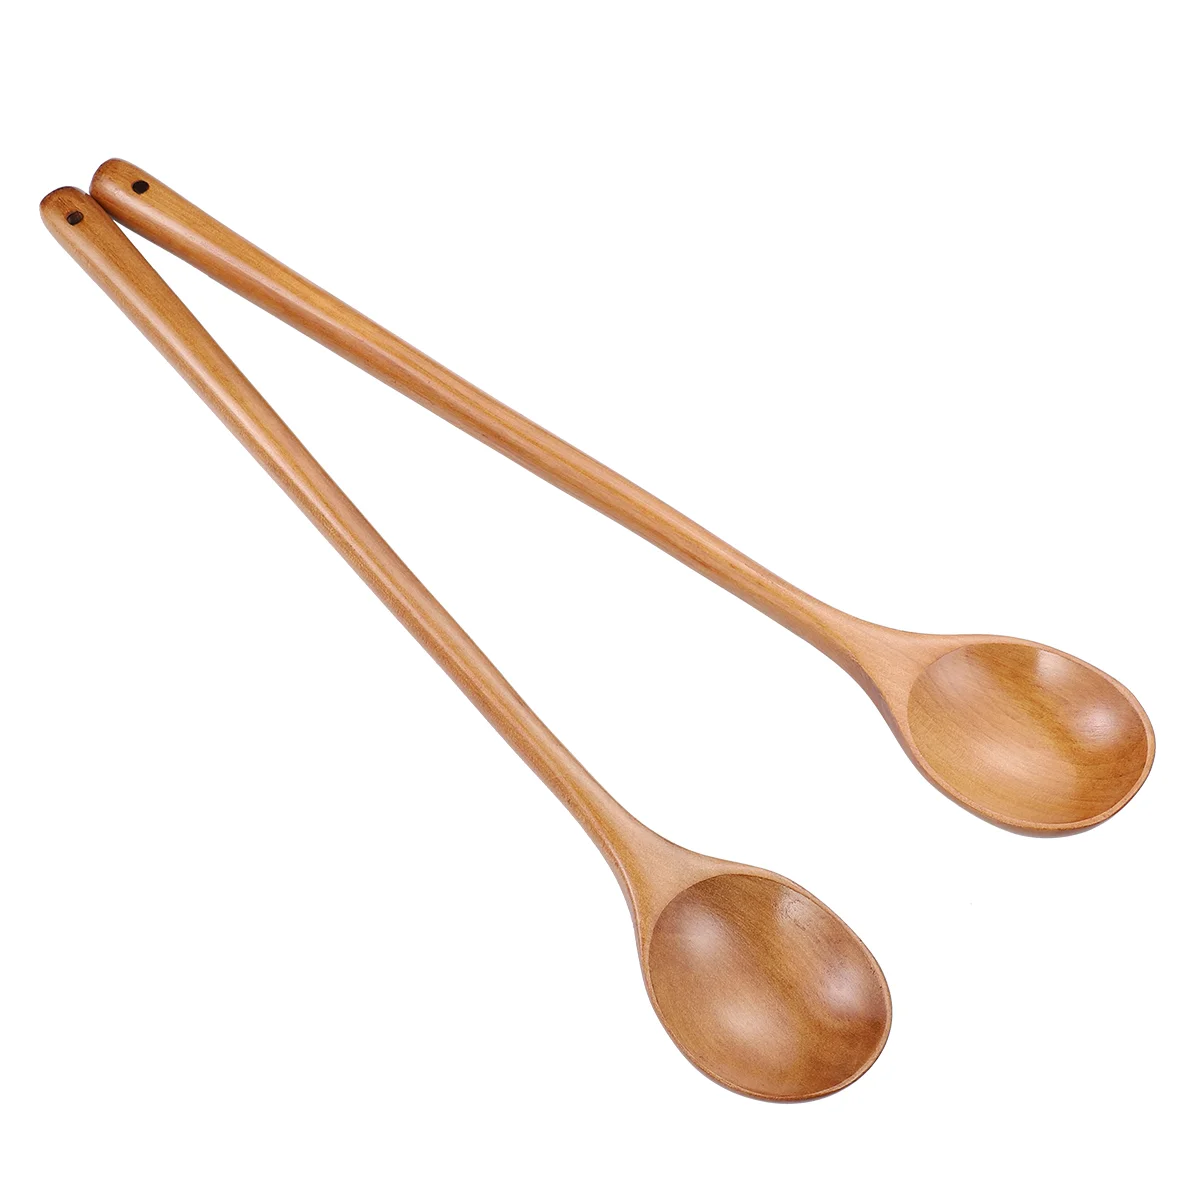 

2 Pcs Mixing Ladle Serving Spoons Dessert Spoon Wooden Soup Spoon Cooking Spoon Coffee Stirring Spoons